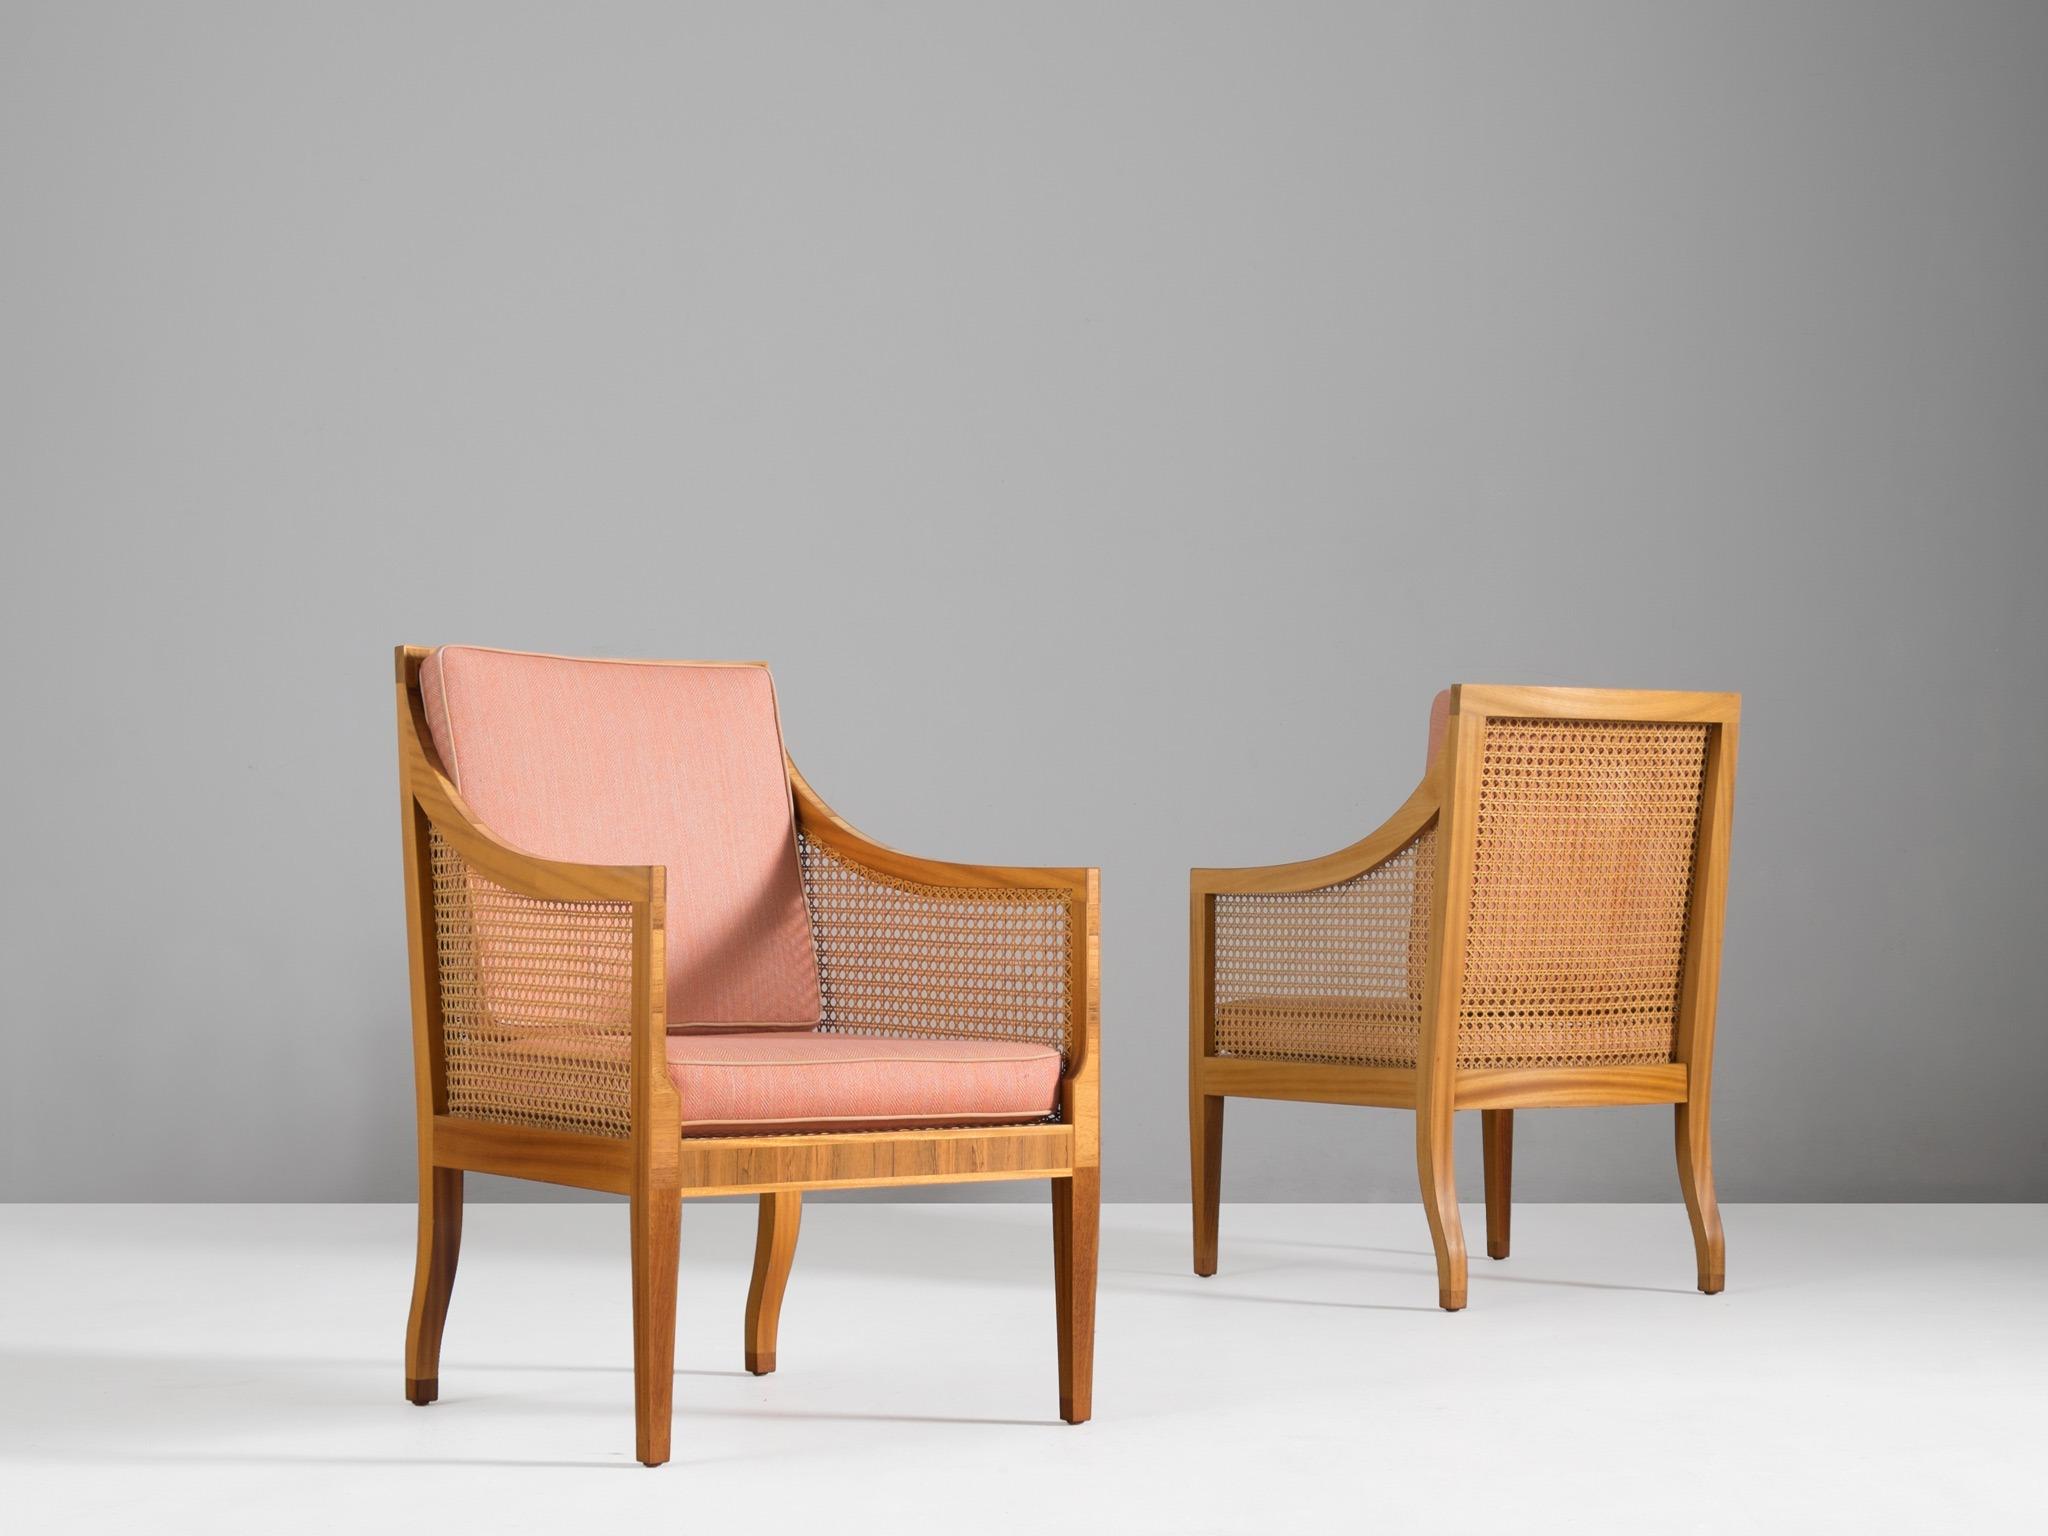 Kaare Klint for Rasmussen, set of two 4488 lounge chairs, mahogany, rosewood, cane and fabric, Denmark, design of 1931.

This elegant set of easy chairs are designed by Kaar Klint in 1931. This 4488 model, also named 